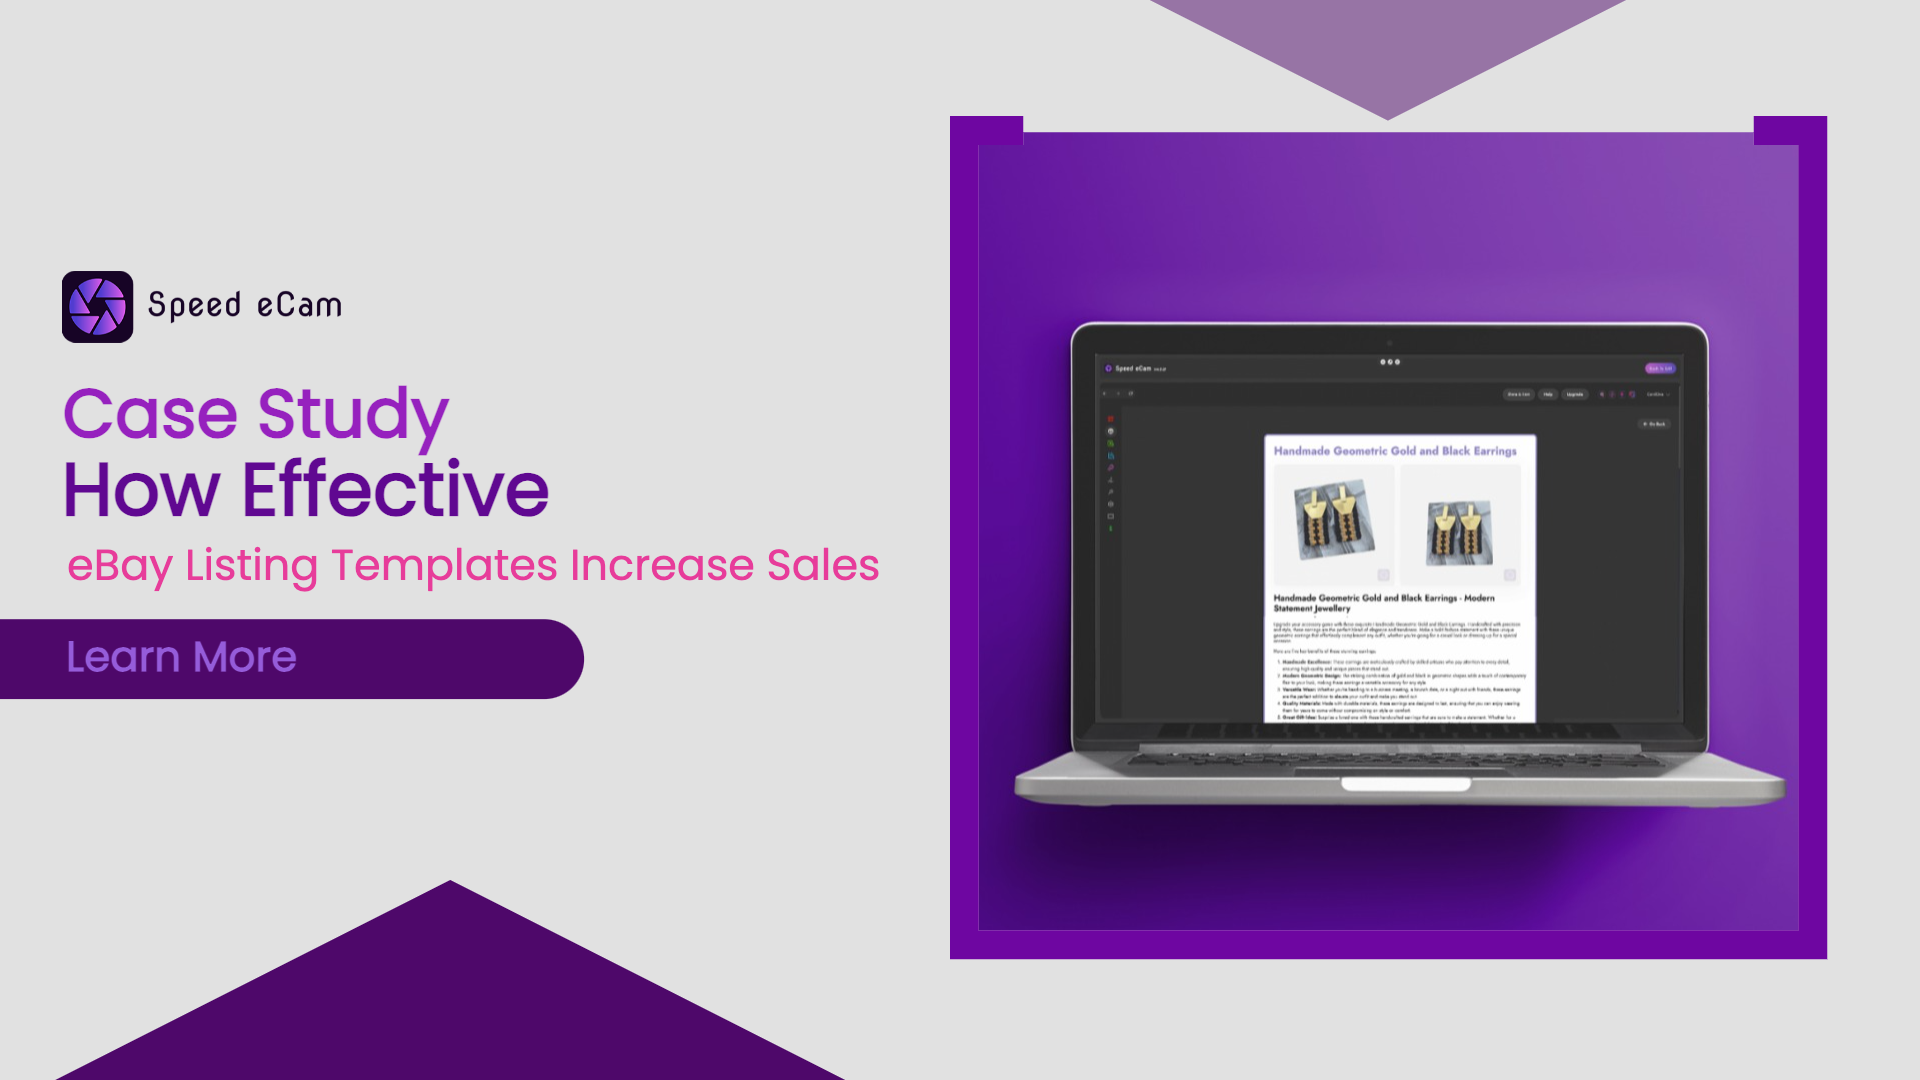 Case Study: How Effective eBay Listing Templates Increase Sales